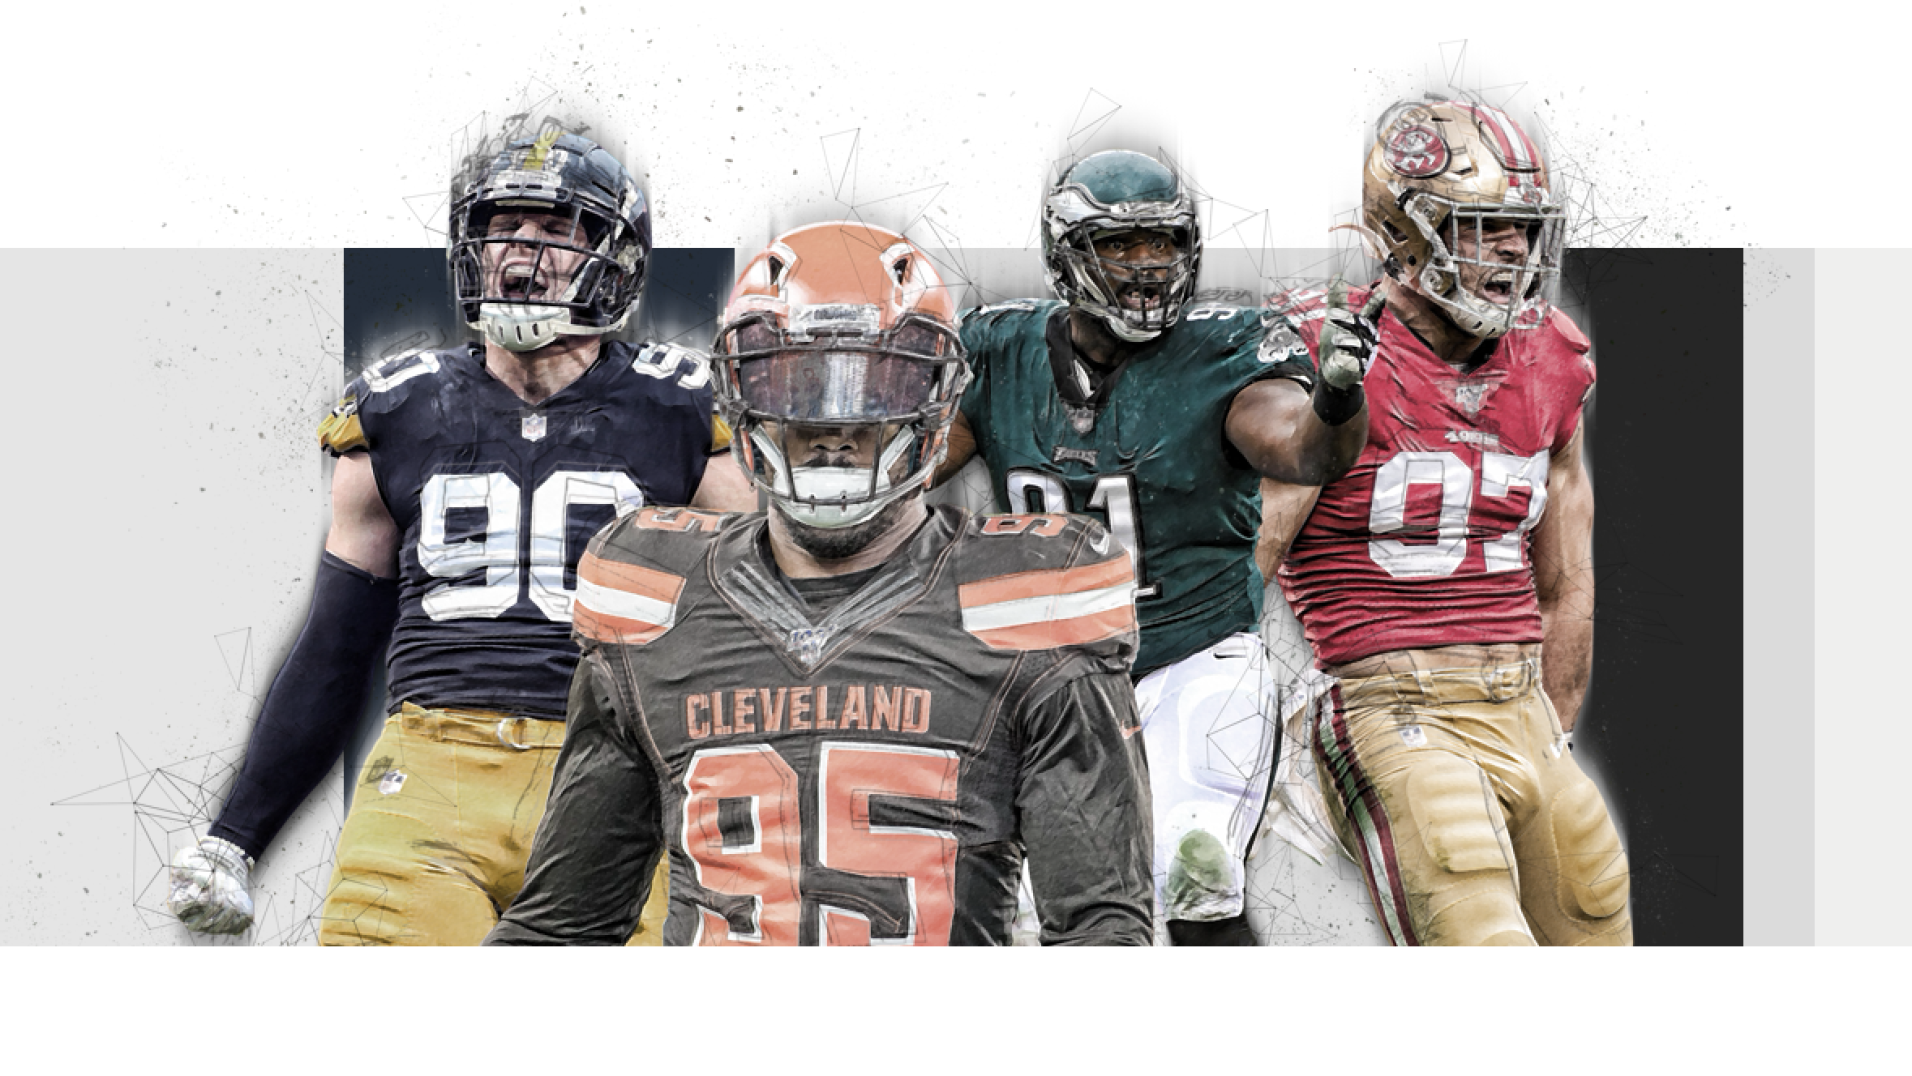 Nfl Defensive Line Rankings All 32 Units Entering The 2020 Nfl Season Nfl News Rankings And 9295